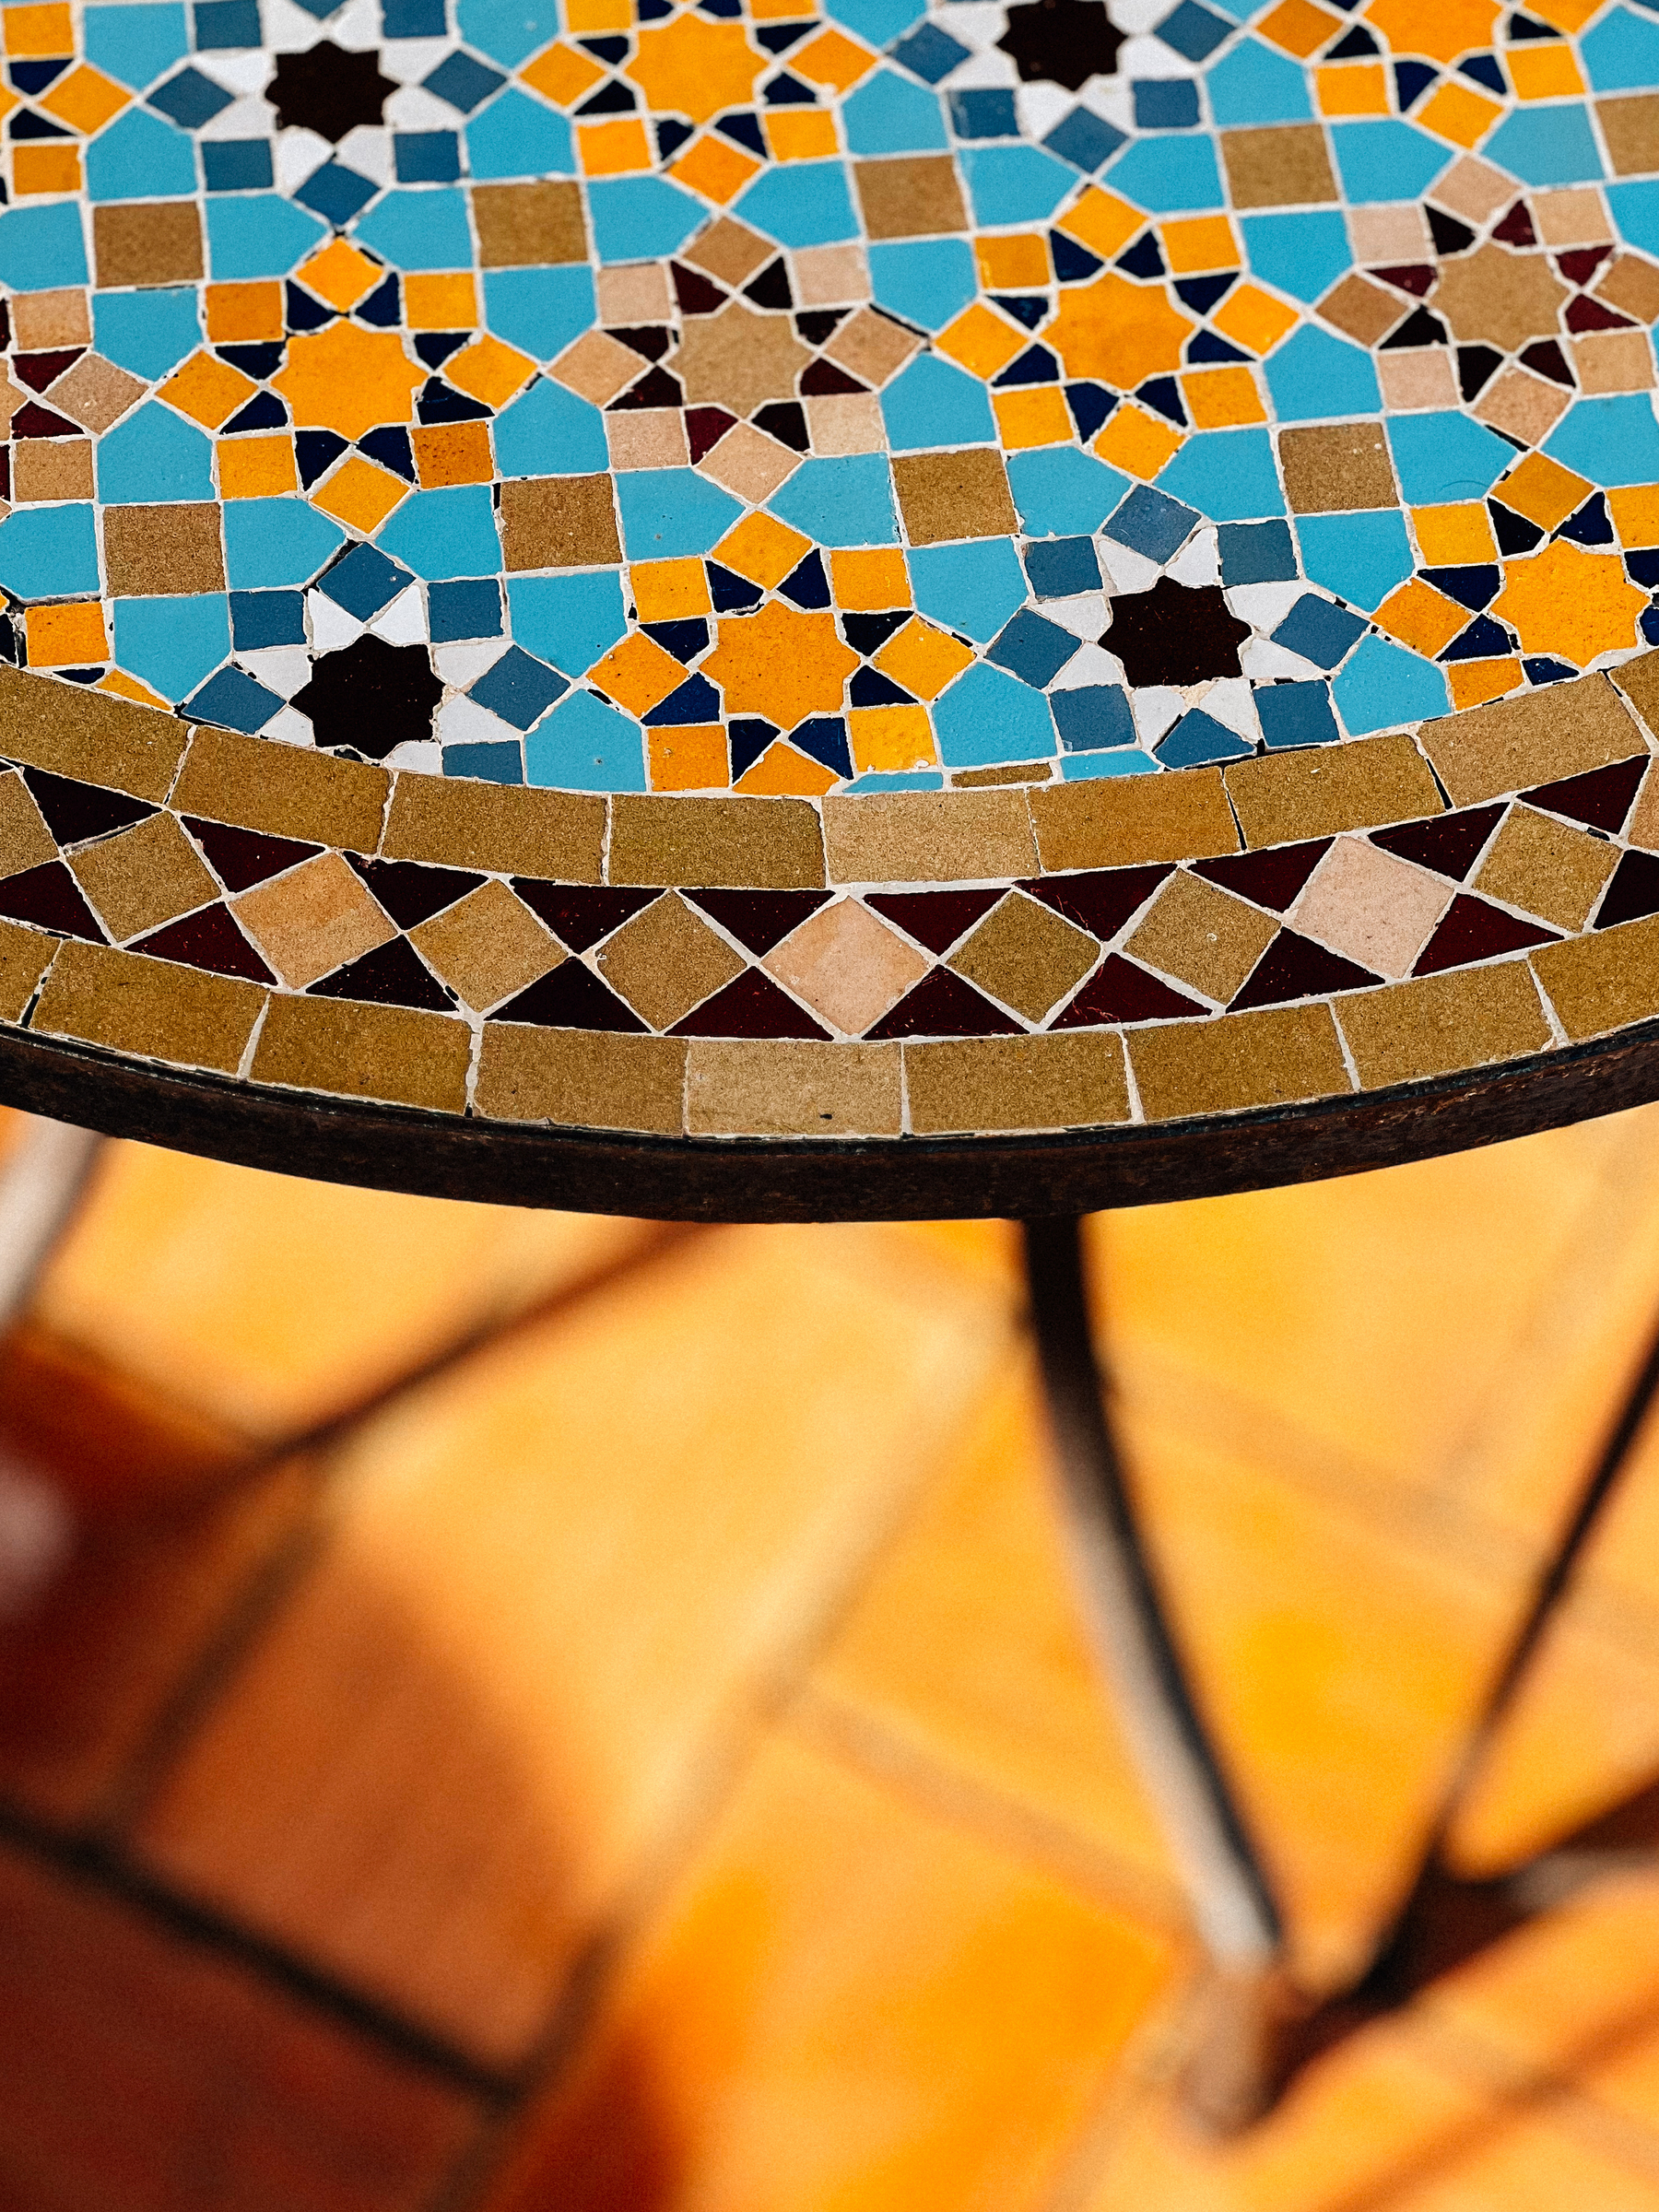 A close-up of a colorful mosaic tile tabletop with a pattern of geometric shapes in shades of blue, orange, and white, set against a blurry background of terracotta floor tiles.